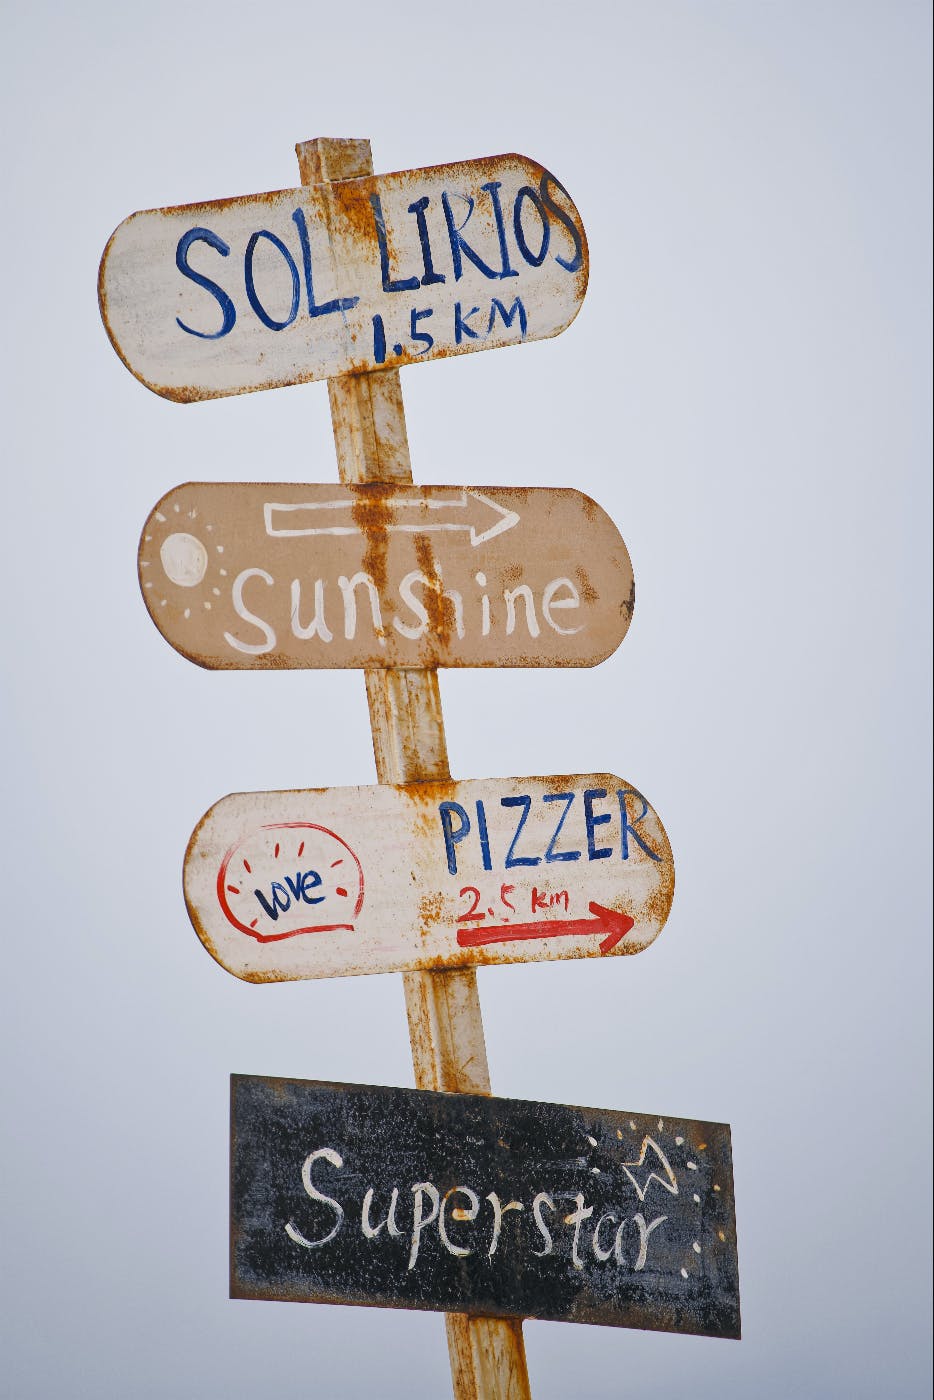 A sign post with: Sol Likios, Sunshine, Pizzer and Superstar signs on it